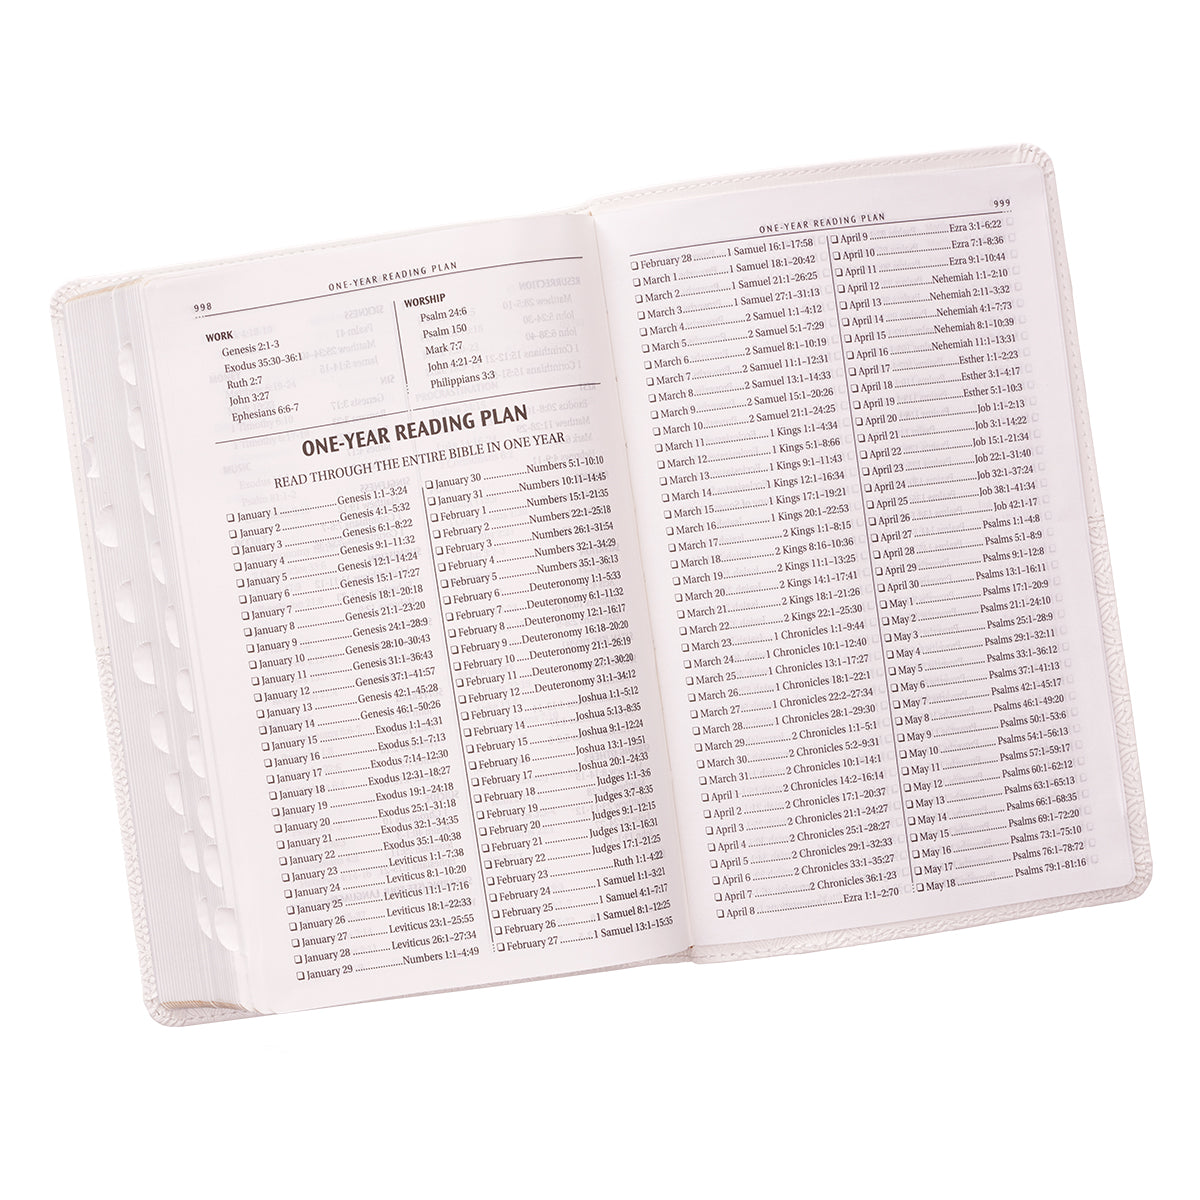 Image of KJV Standard Size Thumb Index Edition: White other